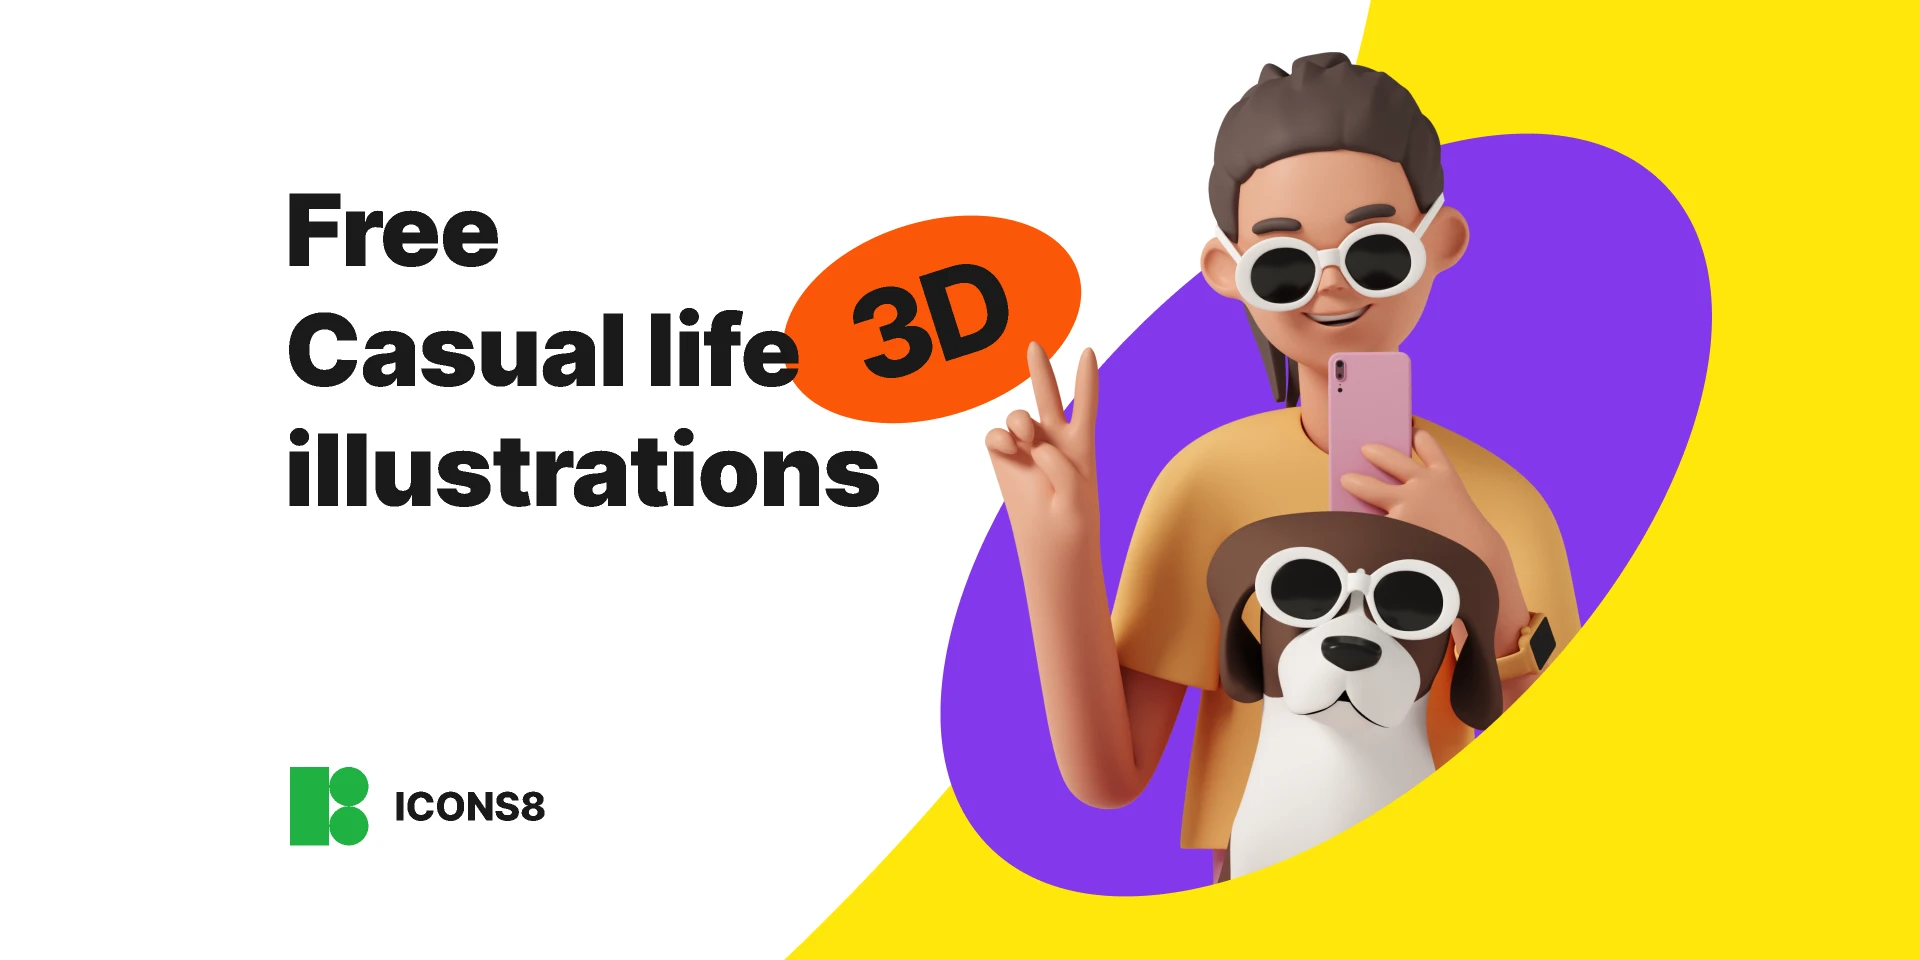 Free Casual life 3D illustrations for Figma and Adobe XD